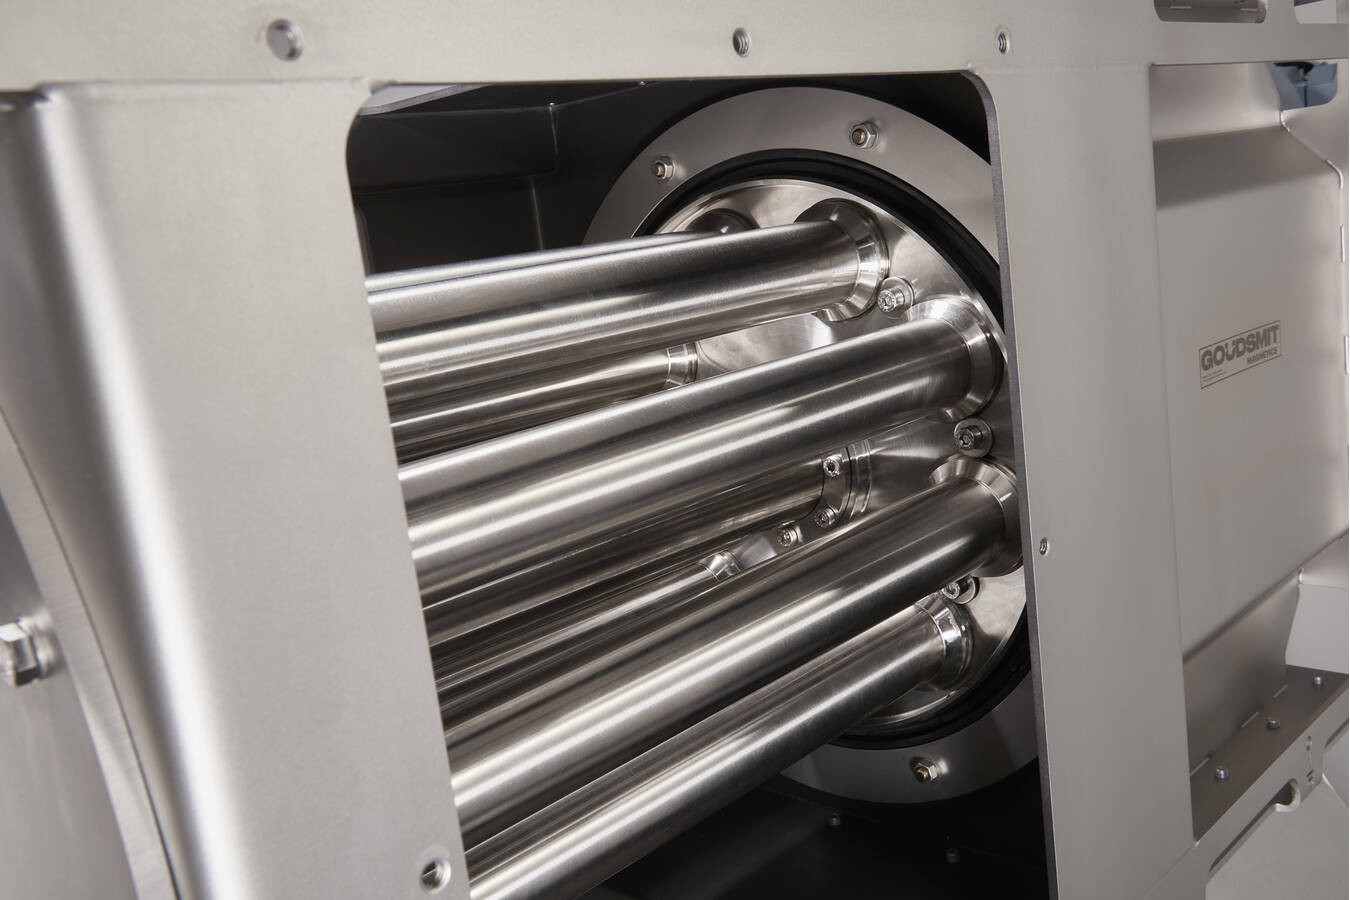 With a flux density of 12,000 gauss on the bars, the magnet can capture paramagnetic particles such as iron oxide and stainless steel in addition to iron particles.